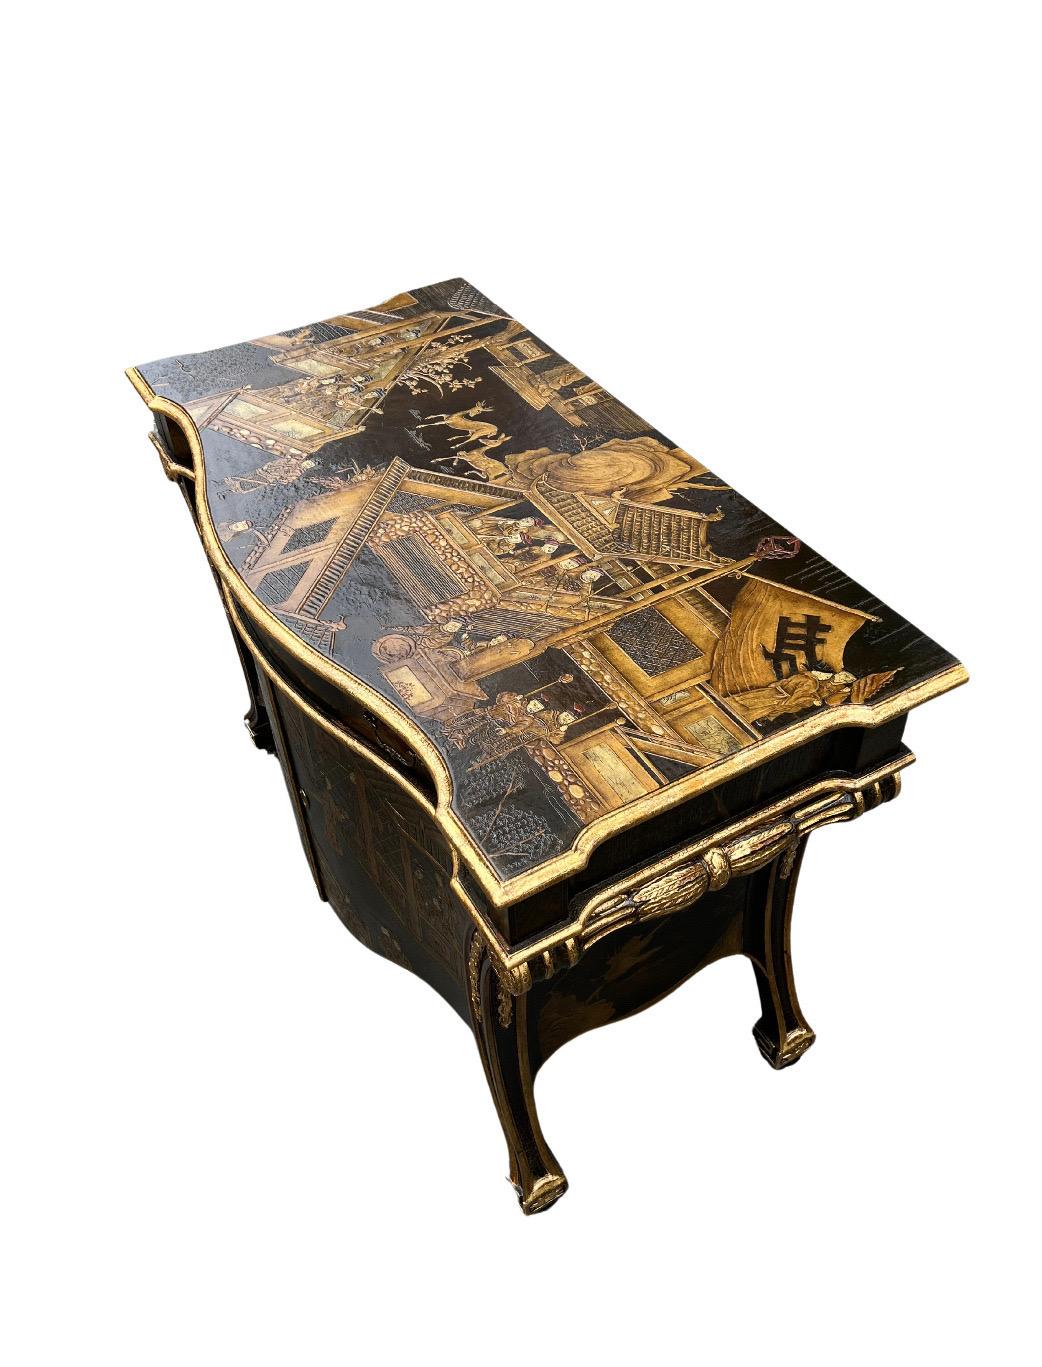 Exquisite Hand Painted Chippendale chinoiserie Commode in Black Lacquer by Baker For Sale 7